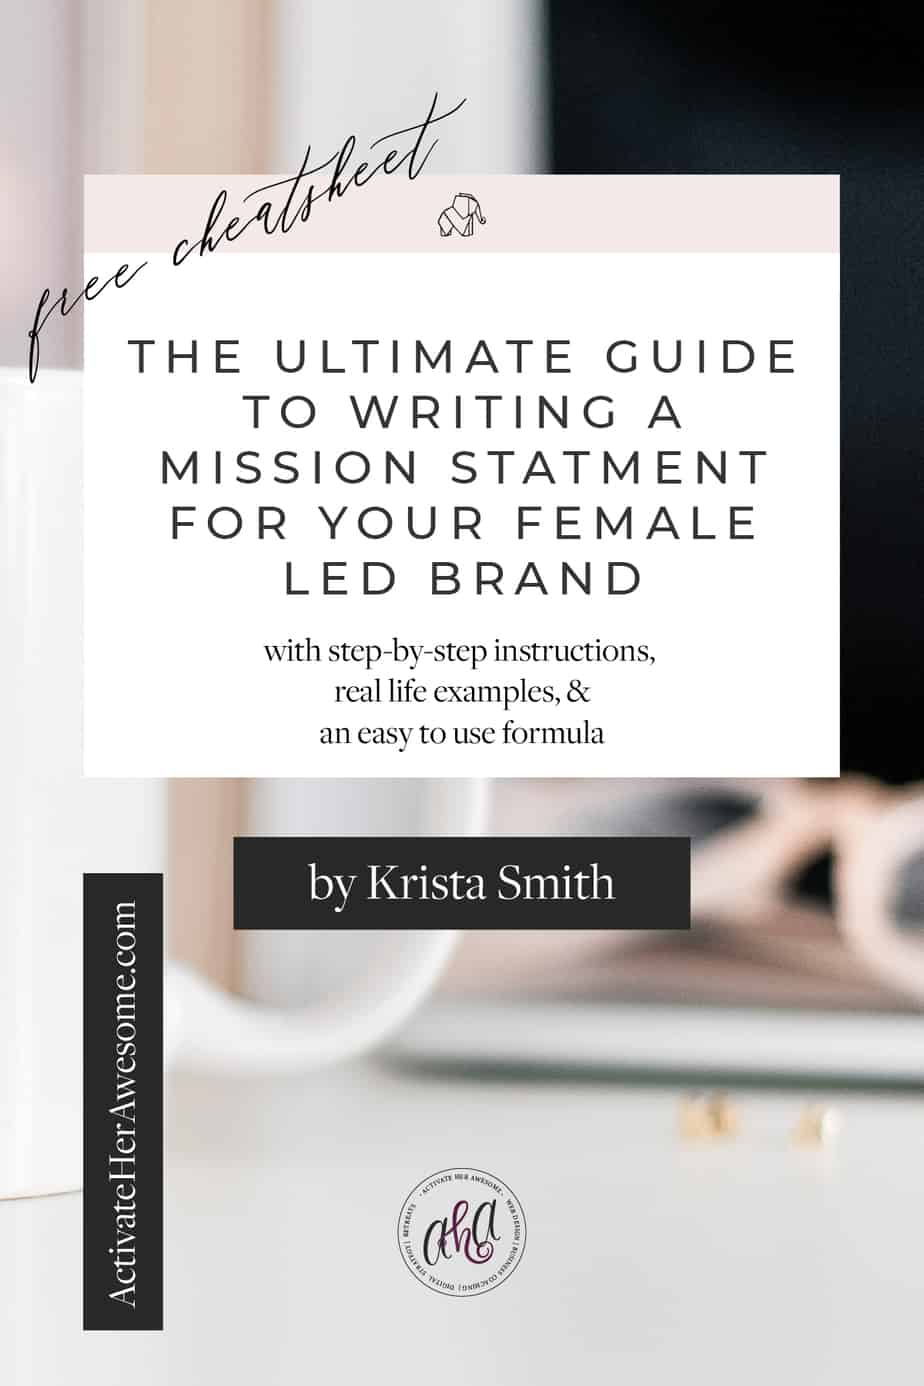 Download this free cheatsheet and get access to an easy-to-use formula that you can use to write a mission statement for your female led brand.
You'll get step by step instructions, real life examples, and an easy-to-use formula to keep you on track.
via Krista Smith at ActivateHerAwesome.com
© 2011-2019 Krista L. Smith | All Rights Reserved